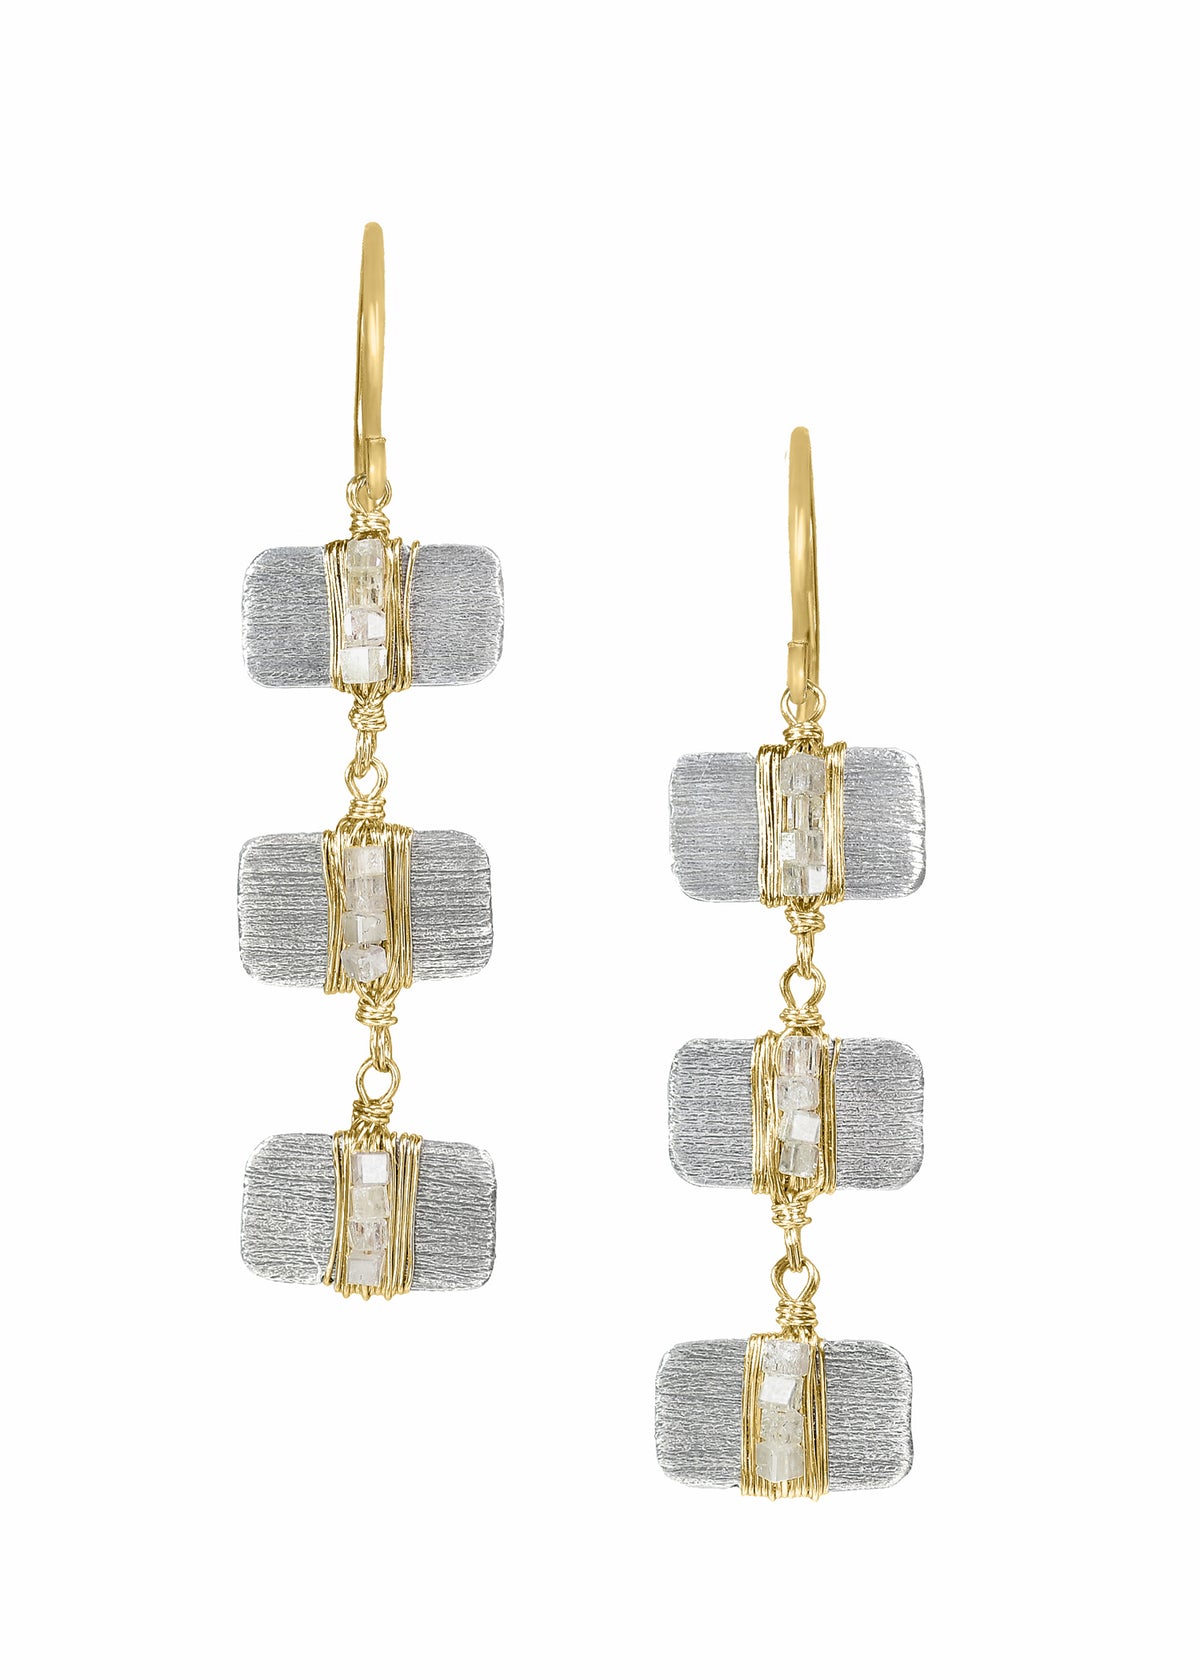 Diamond 14k gold Sterling silver Mixed metal Earrings measure 1-9/16&quot; in length (including the ear wires) and 3/8&quot; in width Handmade in our Los Angeles studio